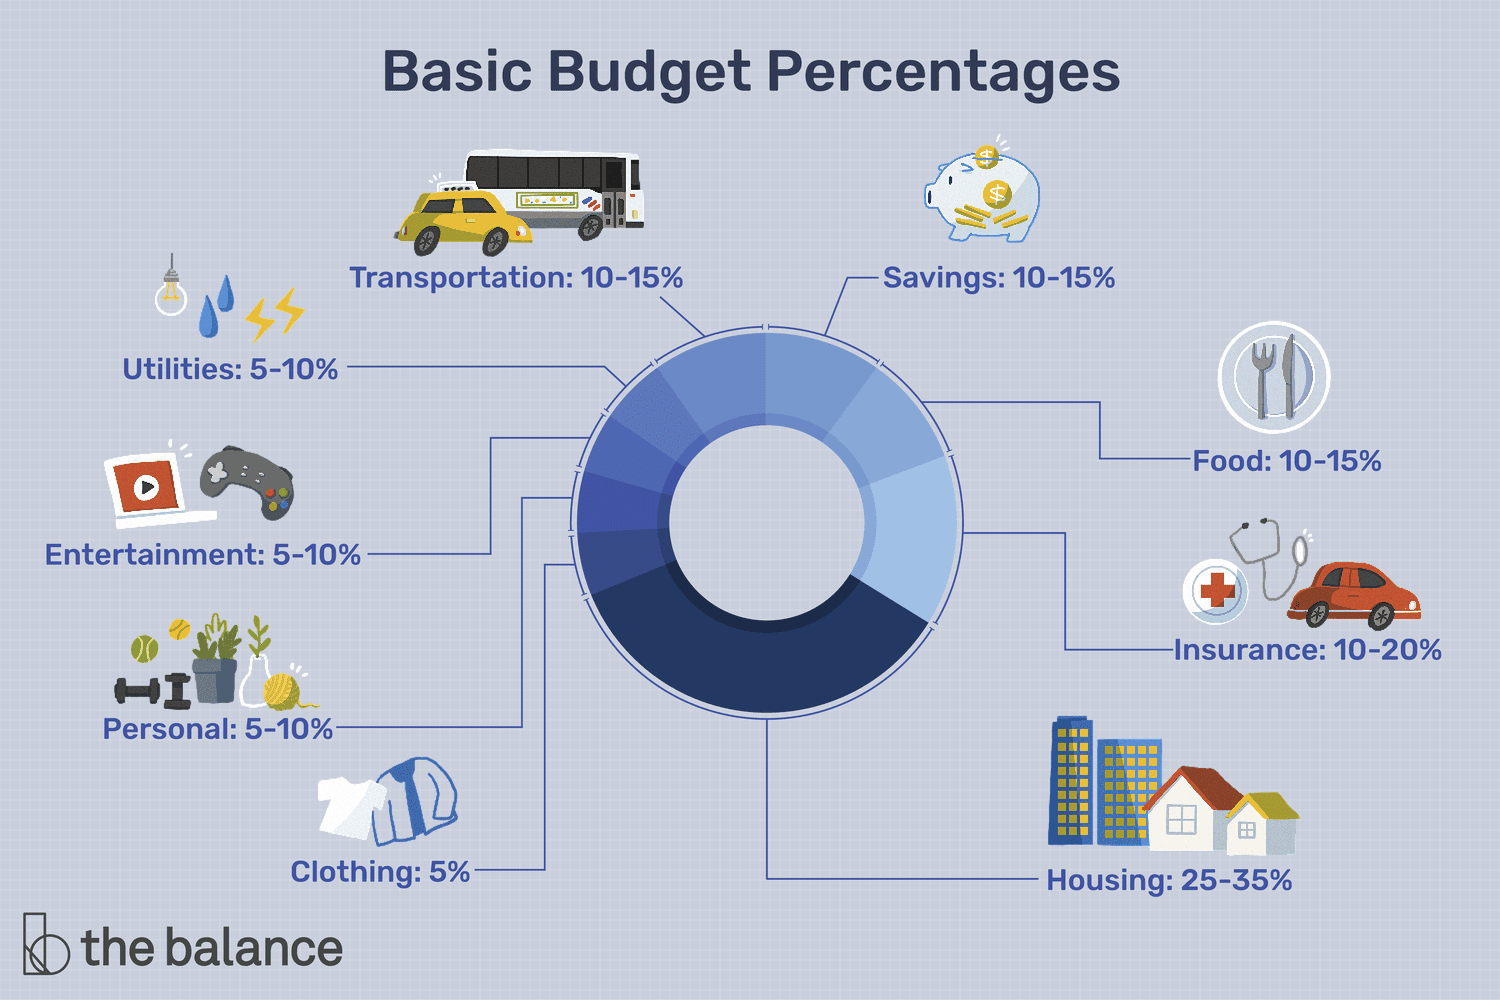 Image shows a circular graph broken down by budgeting percentages. Text reads: "Basic budget percentages: Transportation: 10-15%; savings: 10-15%; food: 10-15%; insurance: 10-20%; housing: 25-35%; clothing: 5%; personal: 5-10%; entertainment: 5-10%; utilities: 5-10%; transportation: 10-15%"